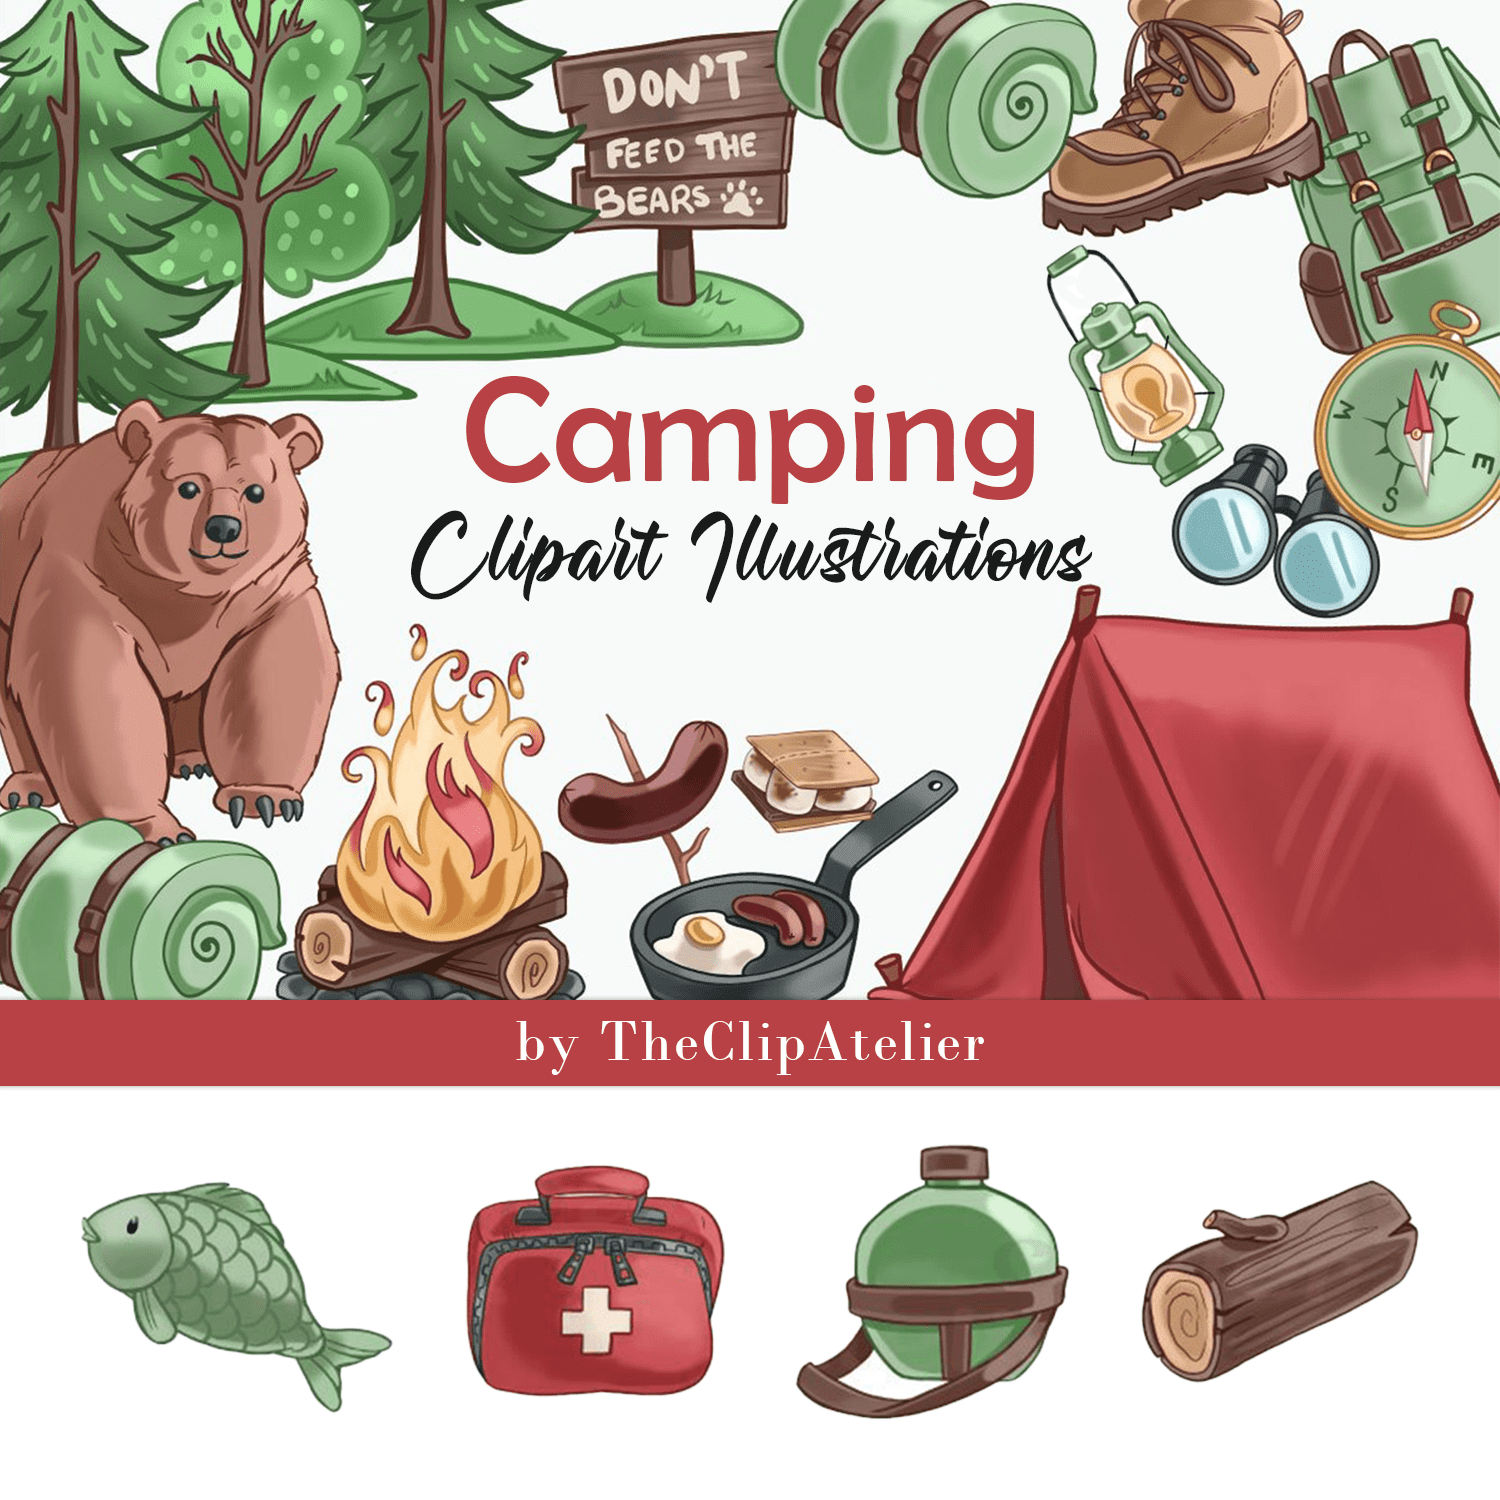 Camping Clipart Illustrations cover.